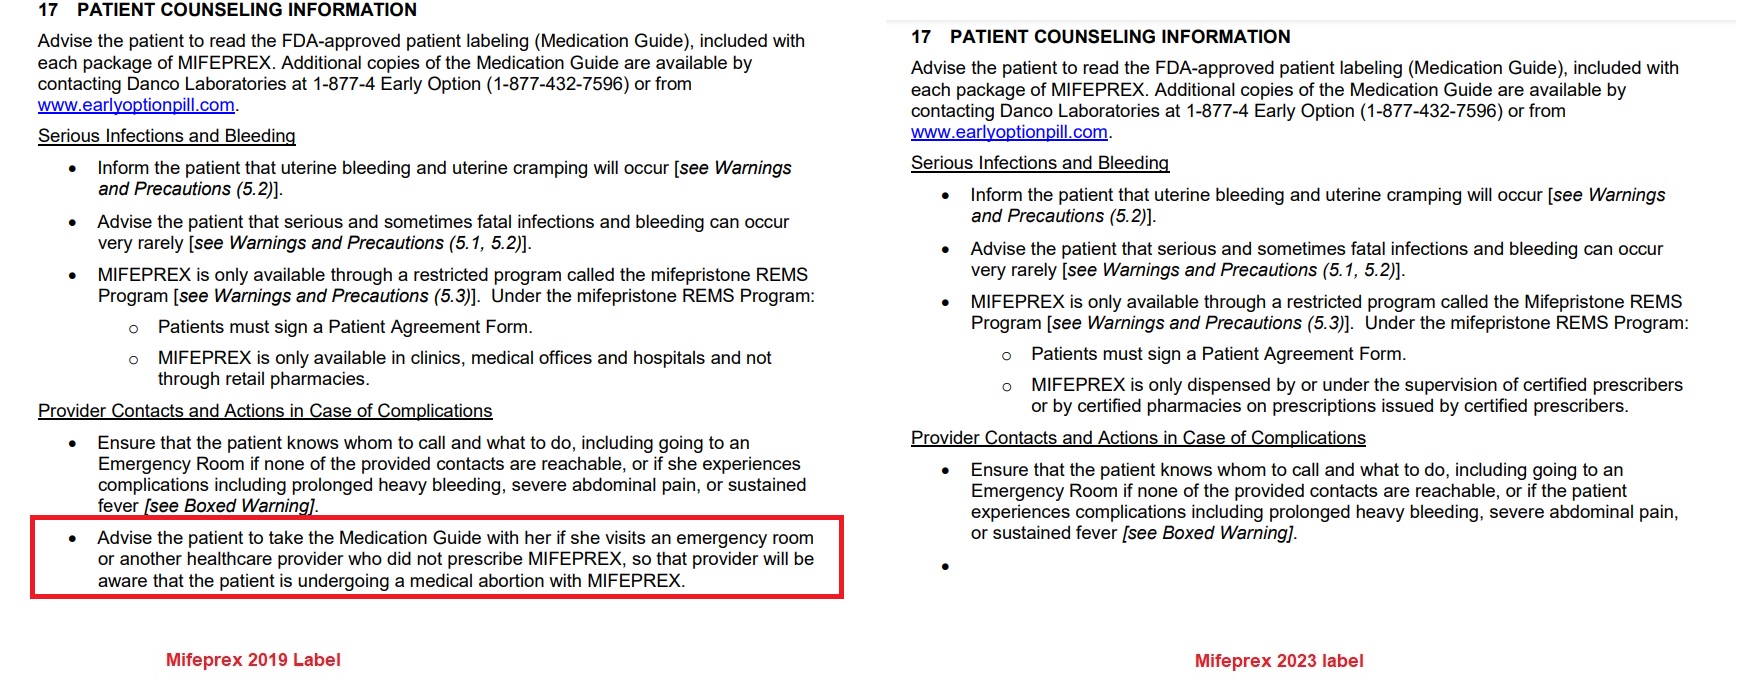 Image: 2023 abortion pill label change no longer tells women to bring medication guide to ER